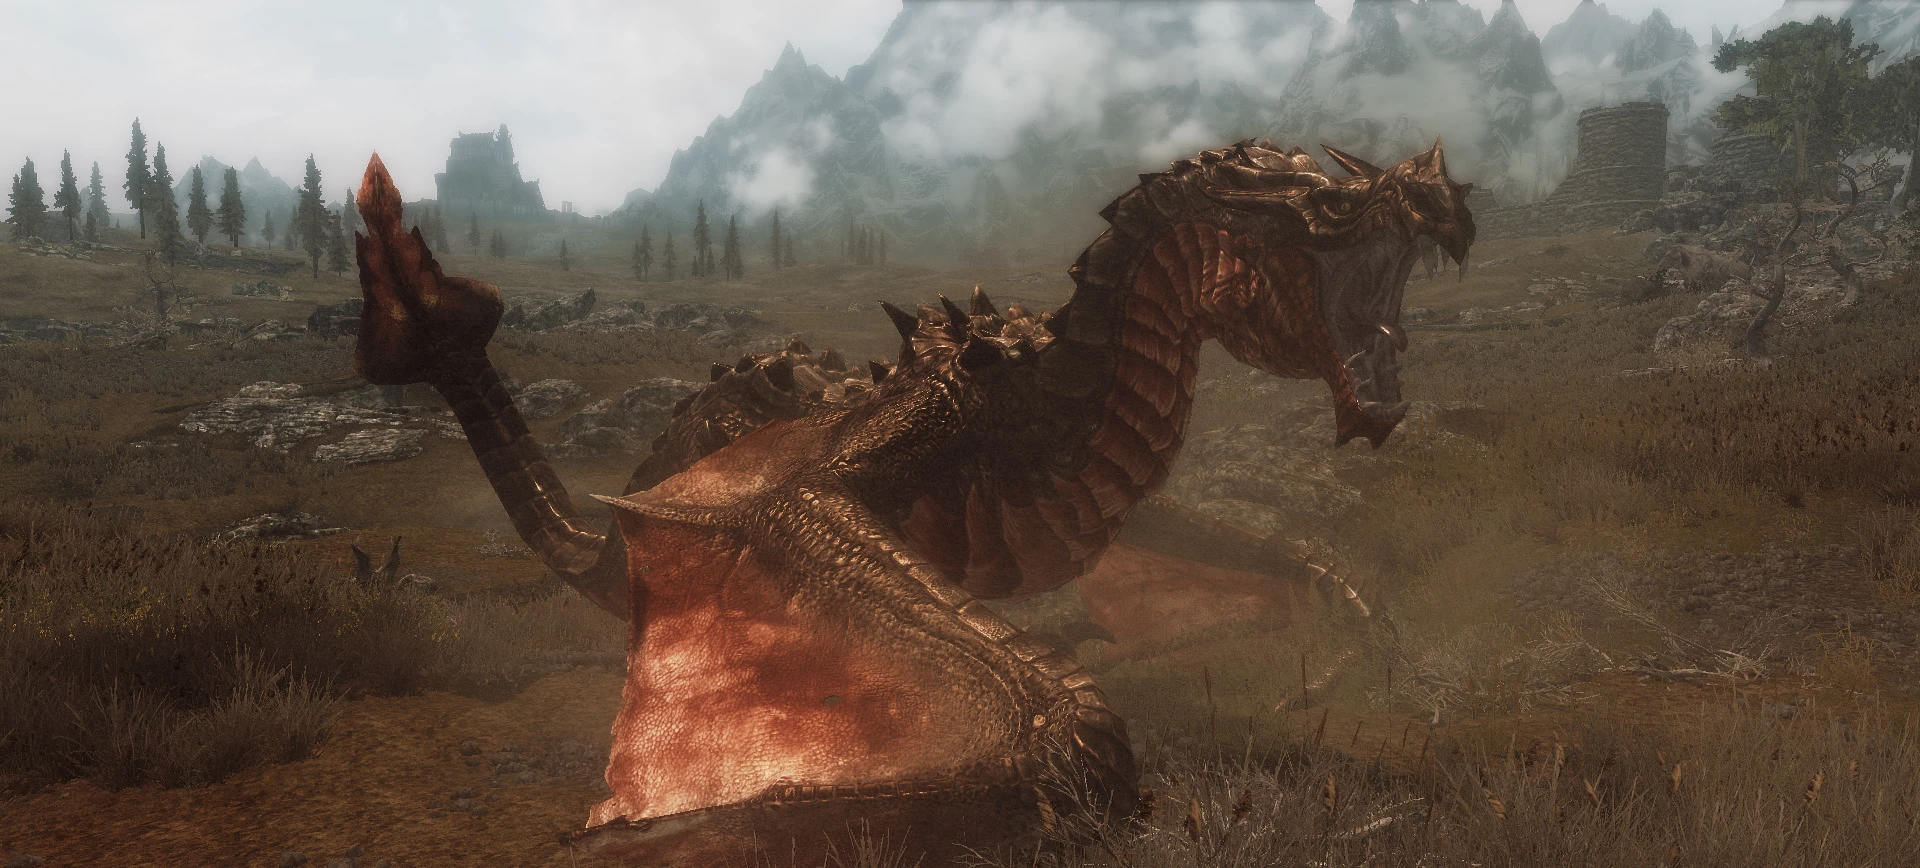 Bellyaches Dragon Texture Replacer at Skyrim Nexus - Mods and Community. so...